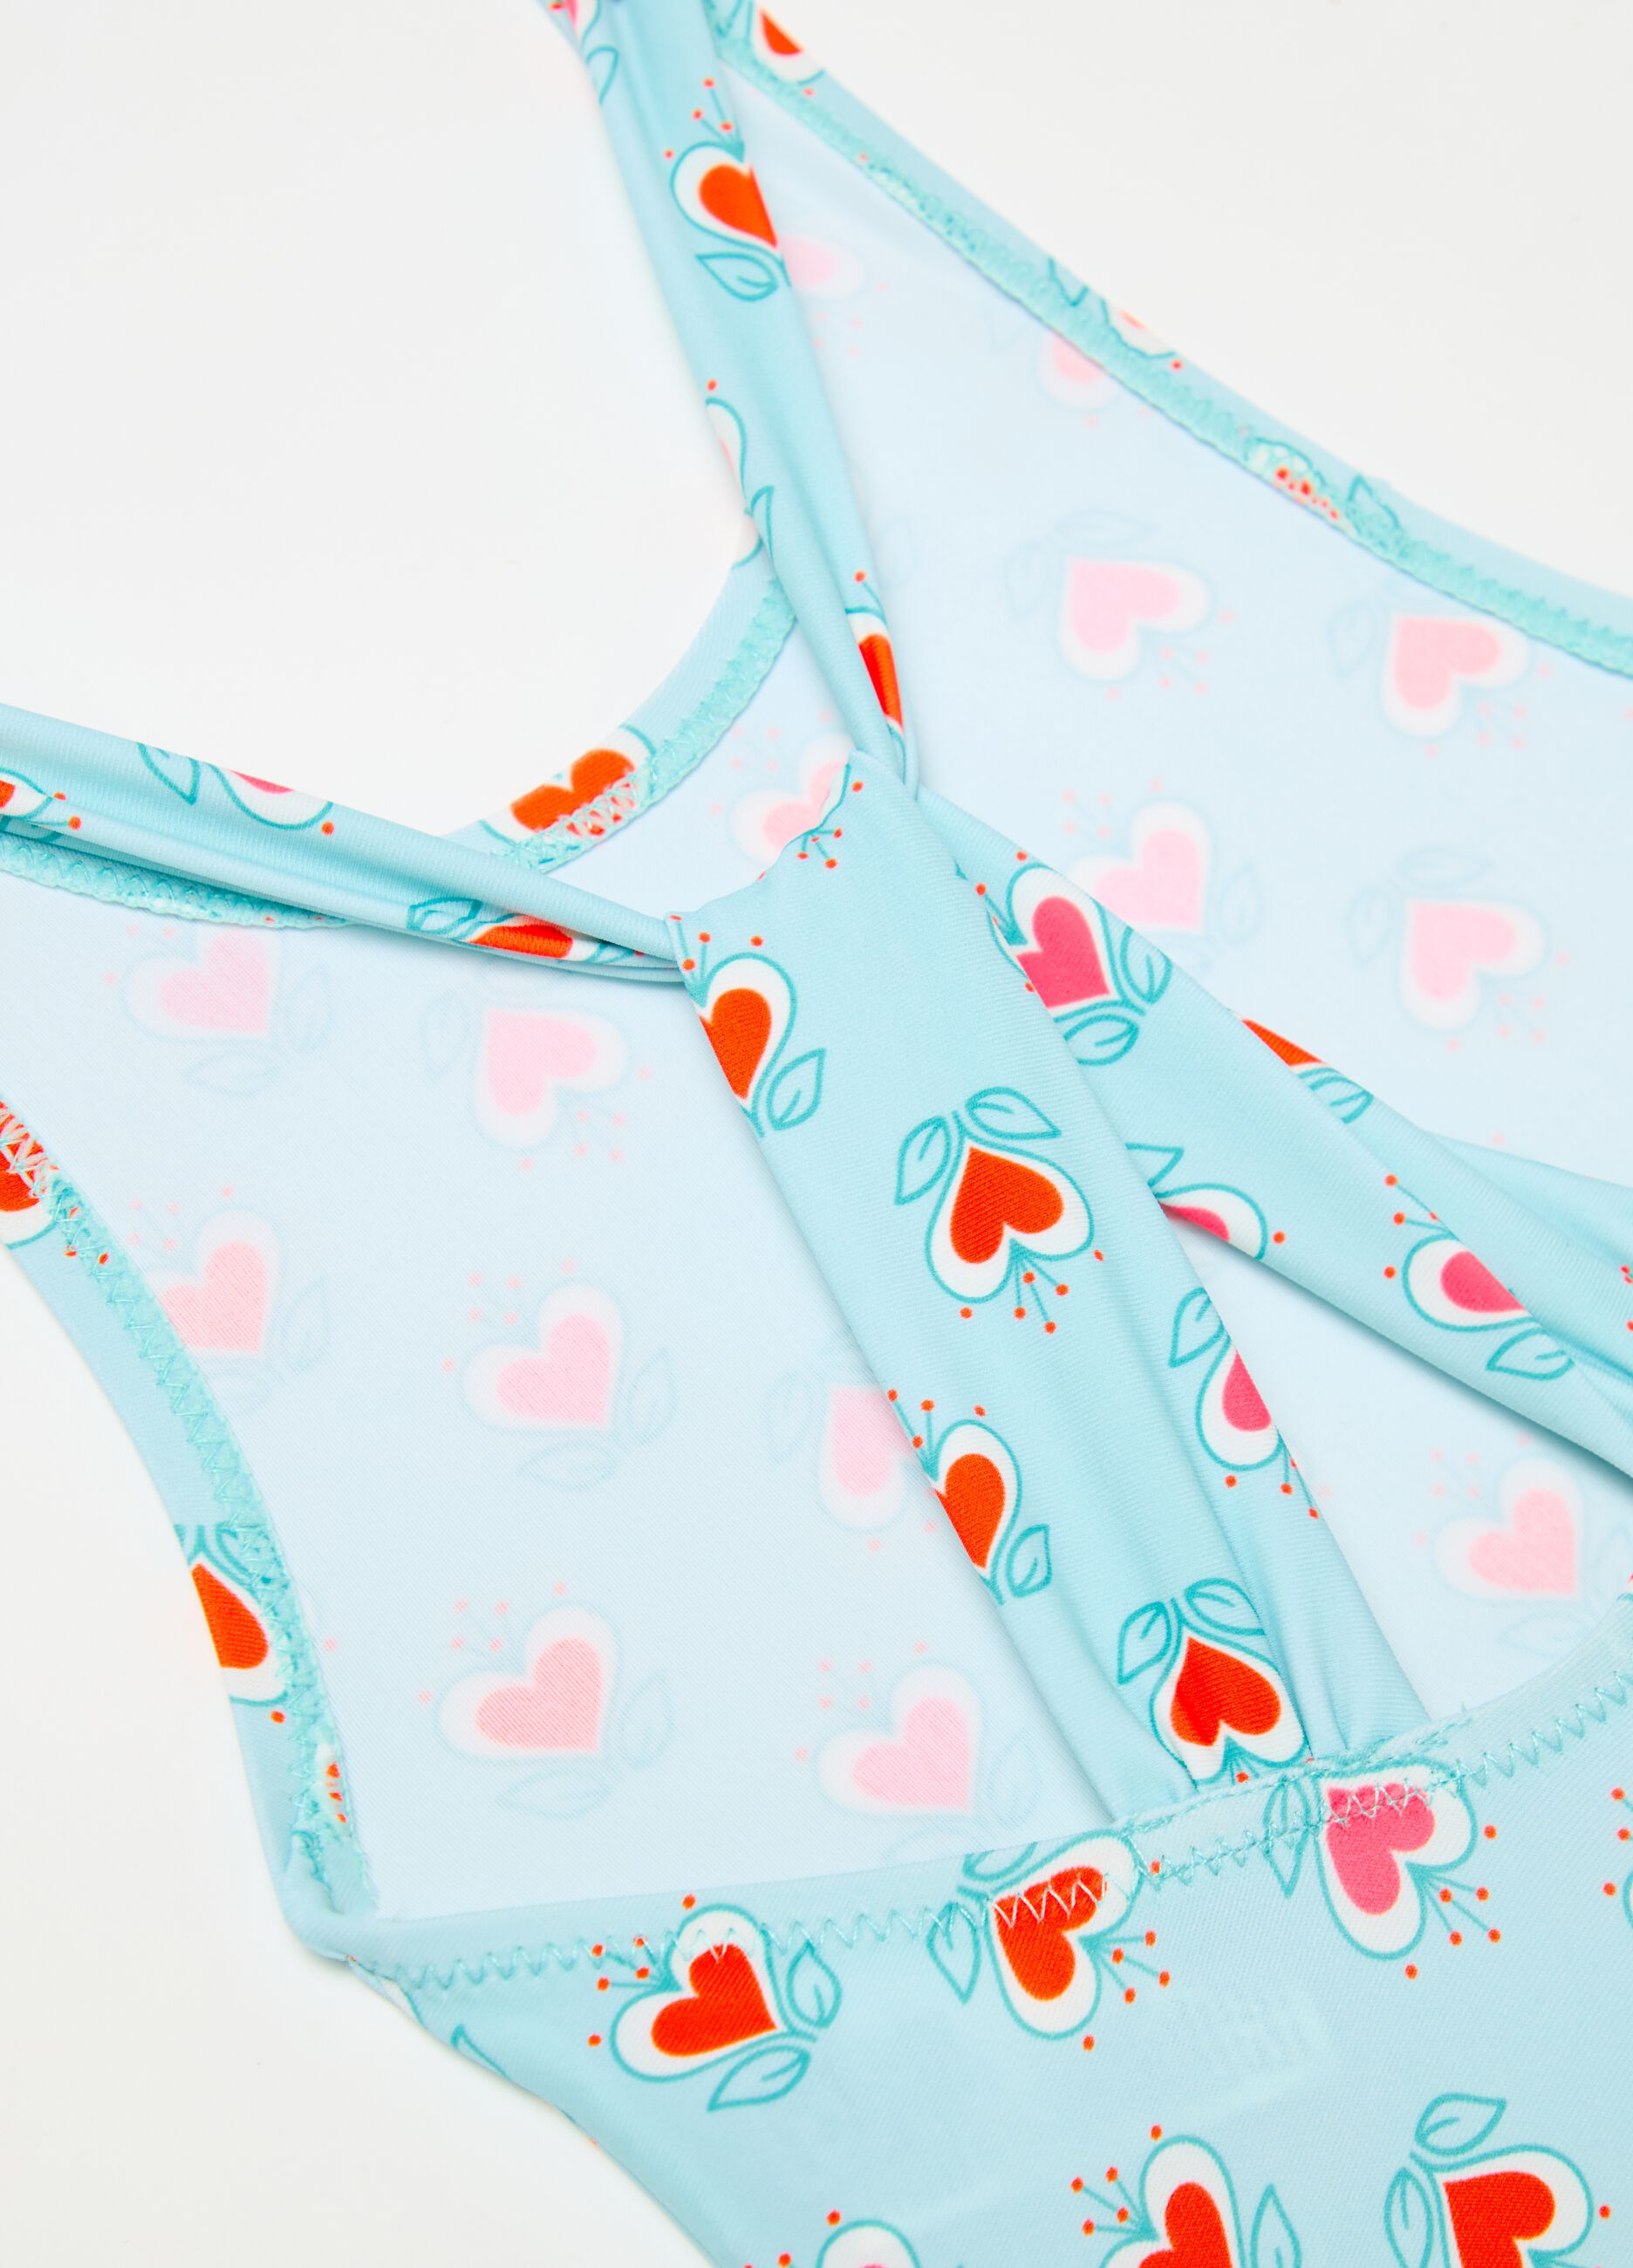 One-piece swimsuit with floral hearts print